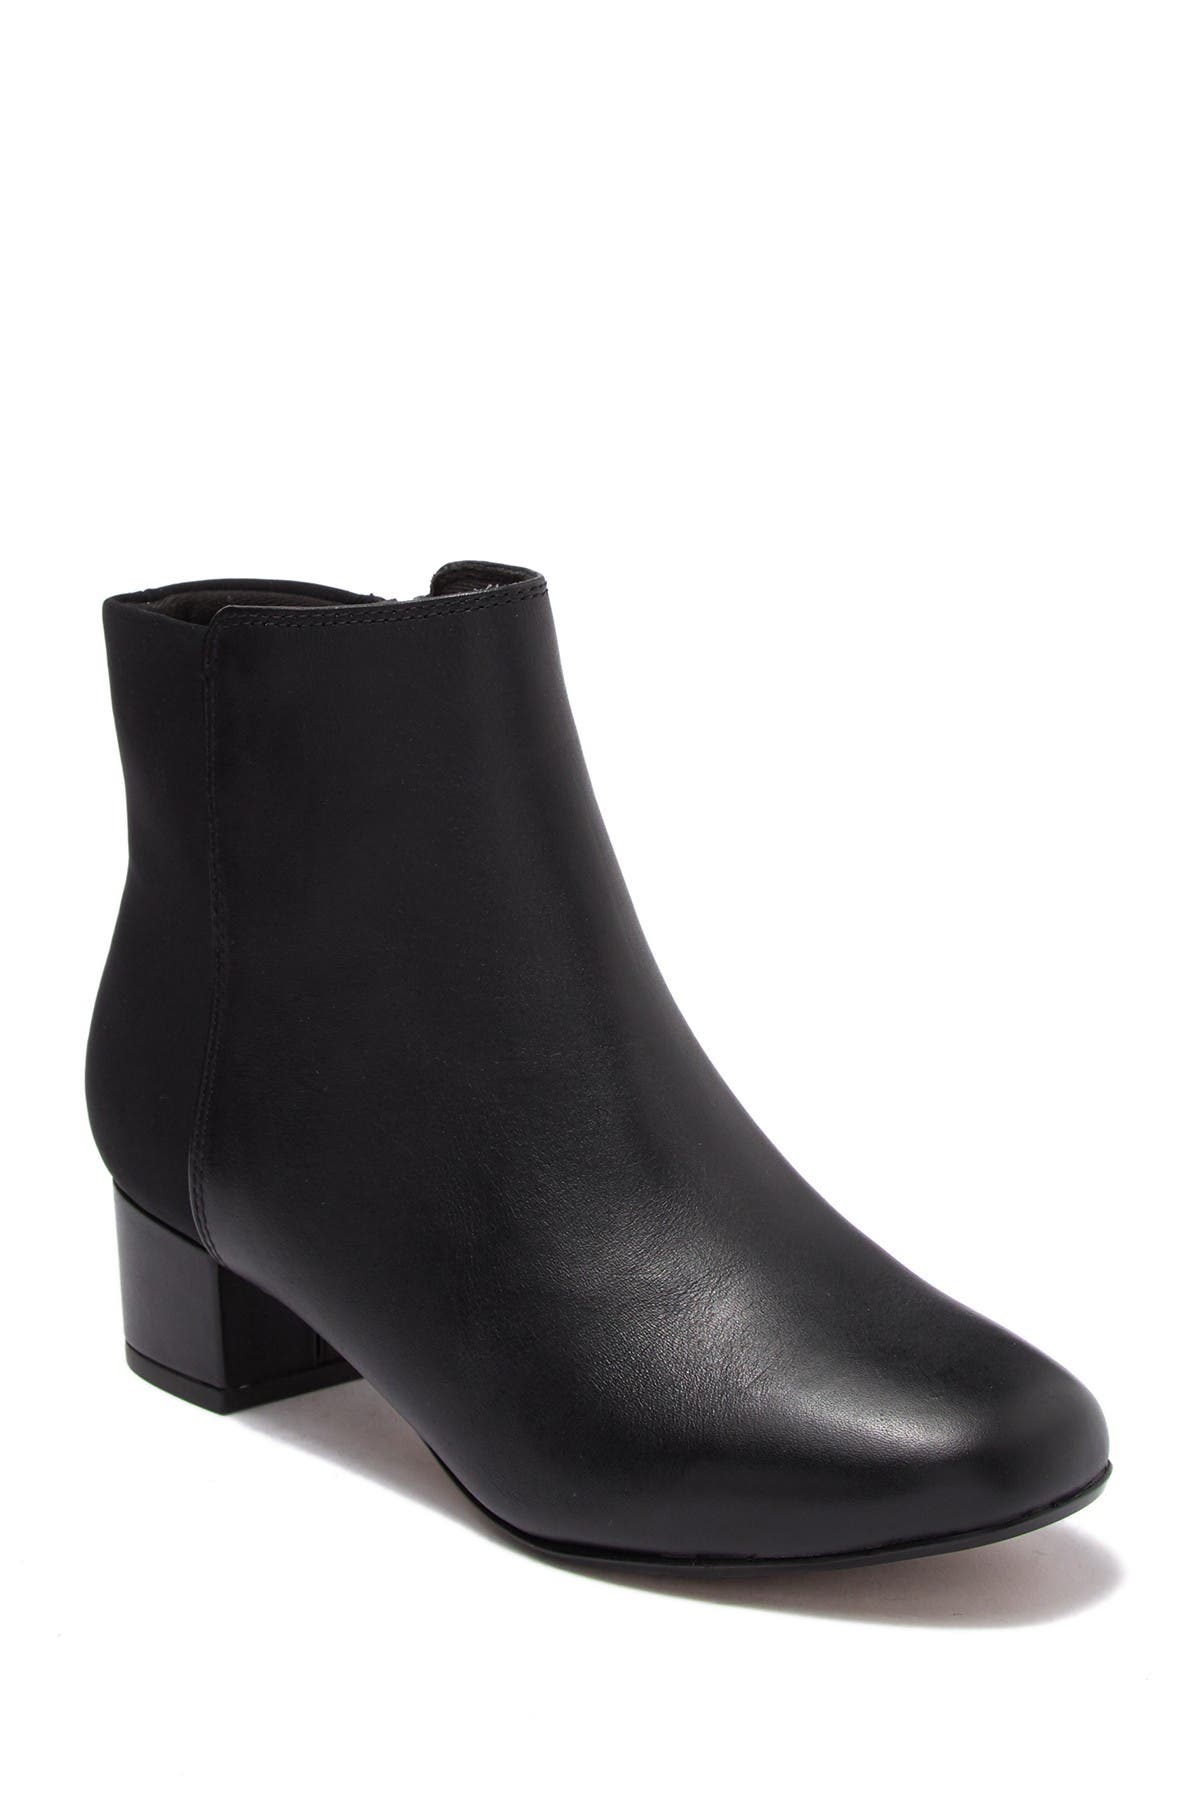 Clarks | Chartli Valley Leather Bootie 